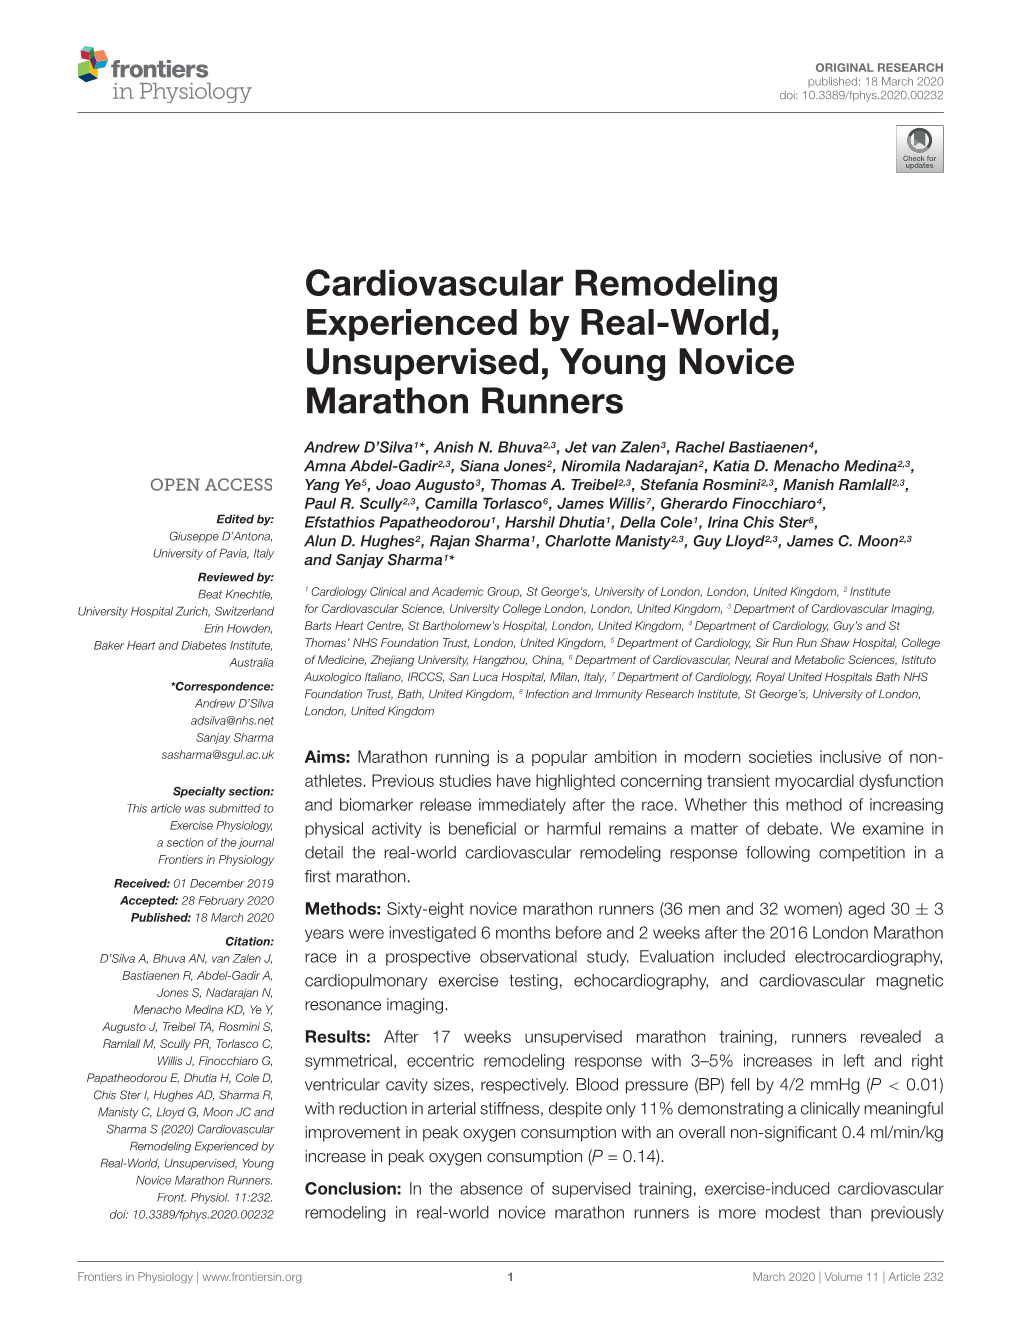 Cardiovascular Remodeling Experienced by Real-World, Unsupervised, Young Novice Marathon Runners